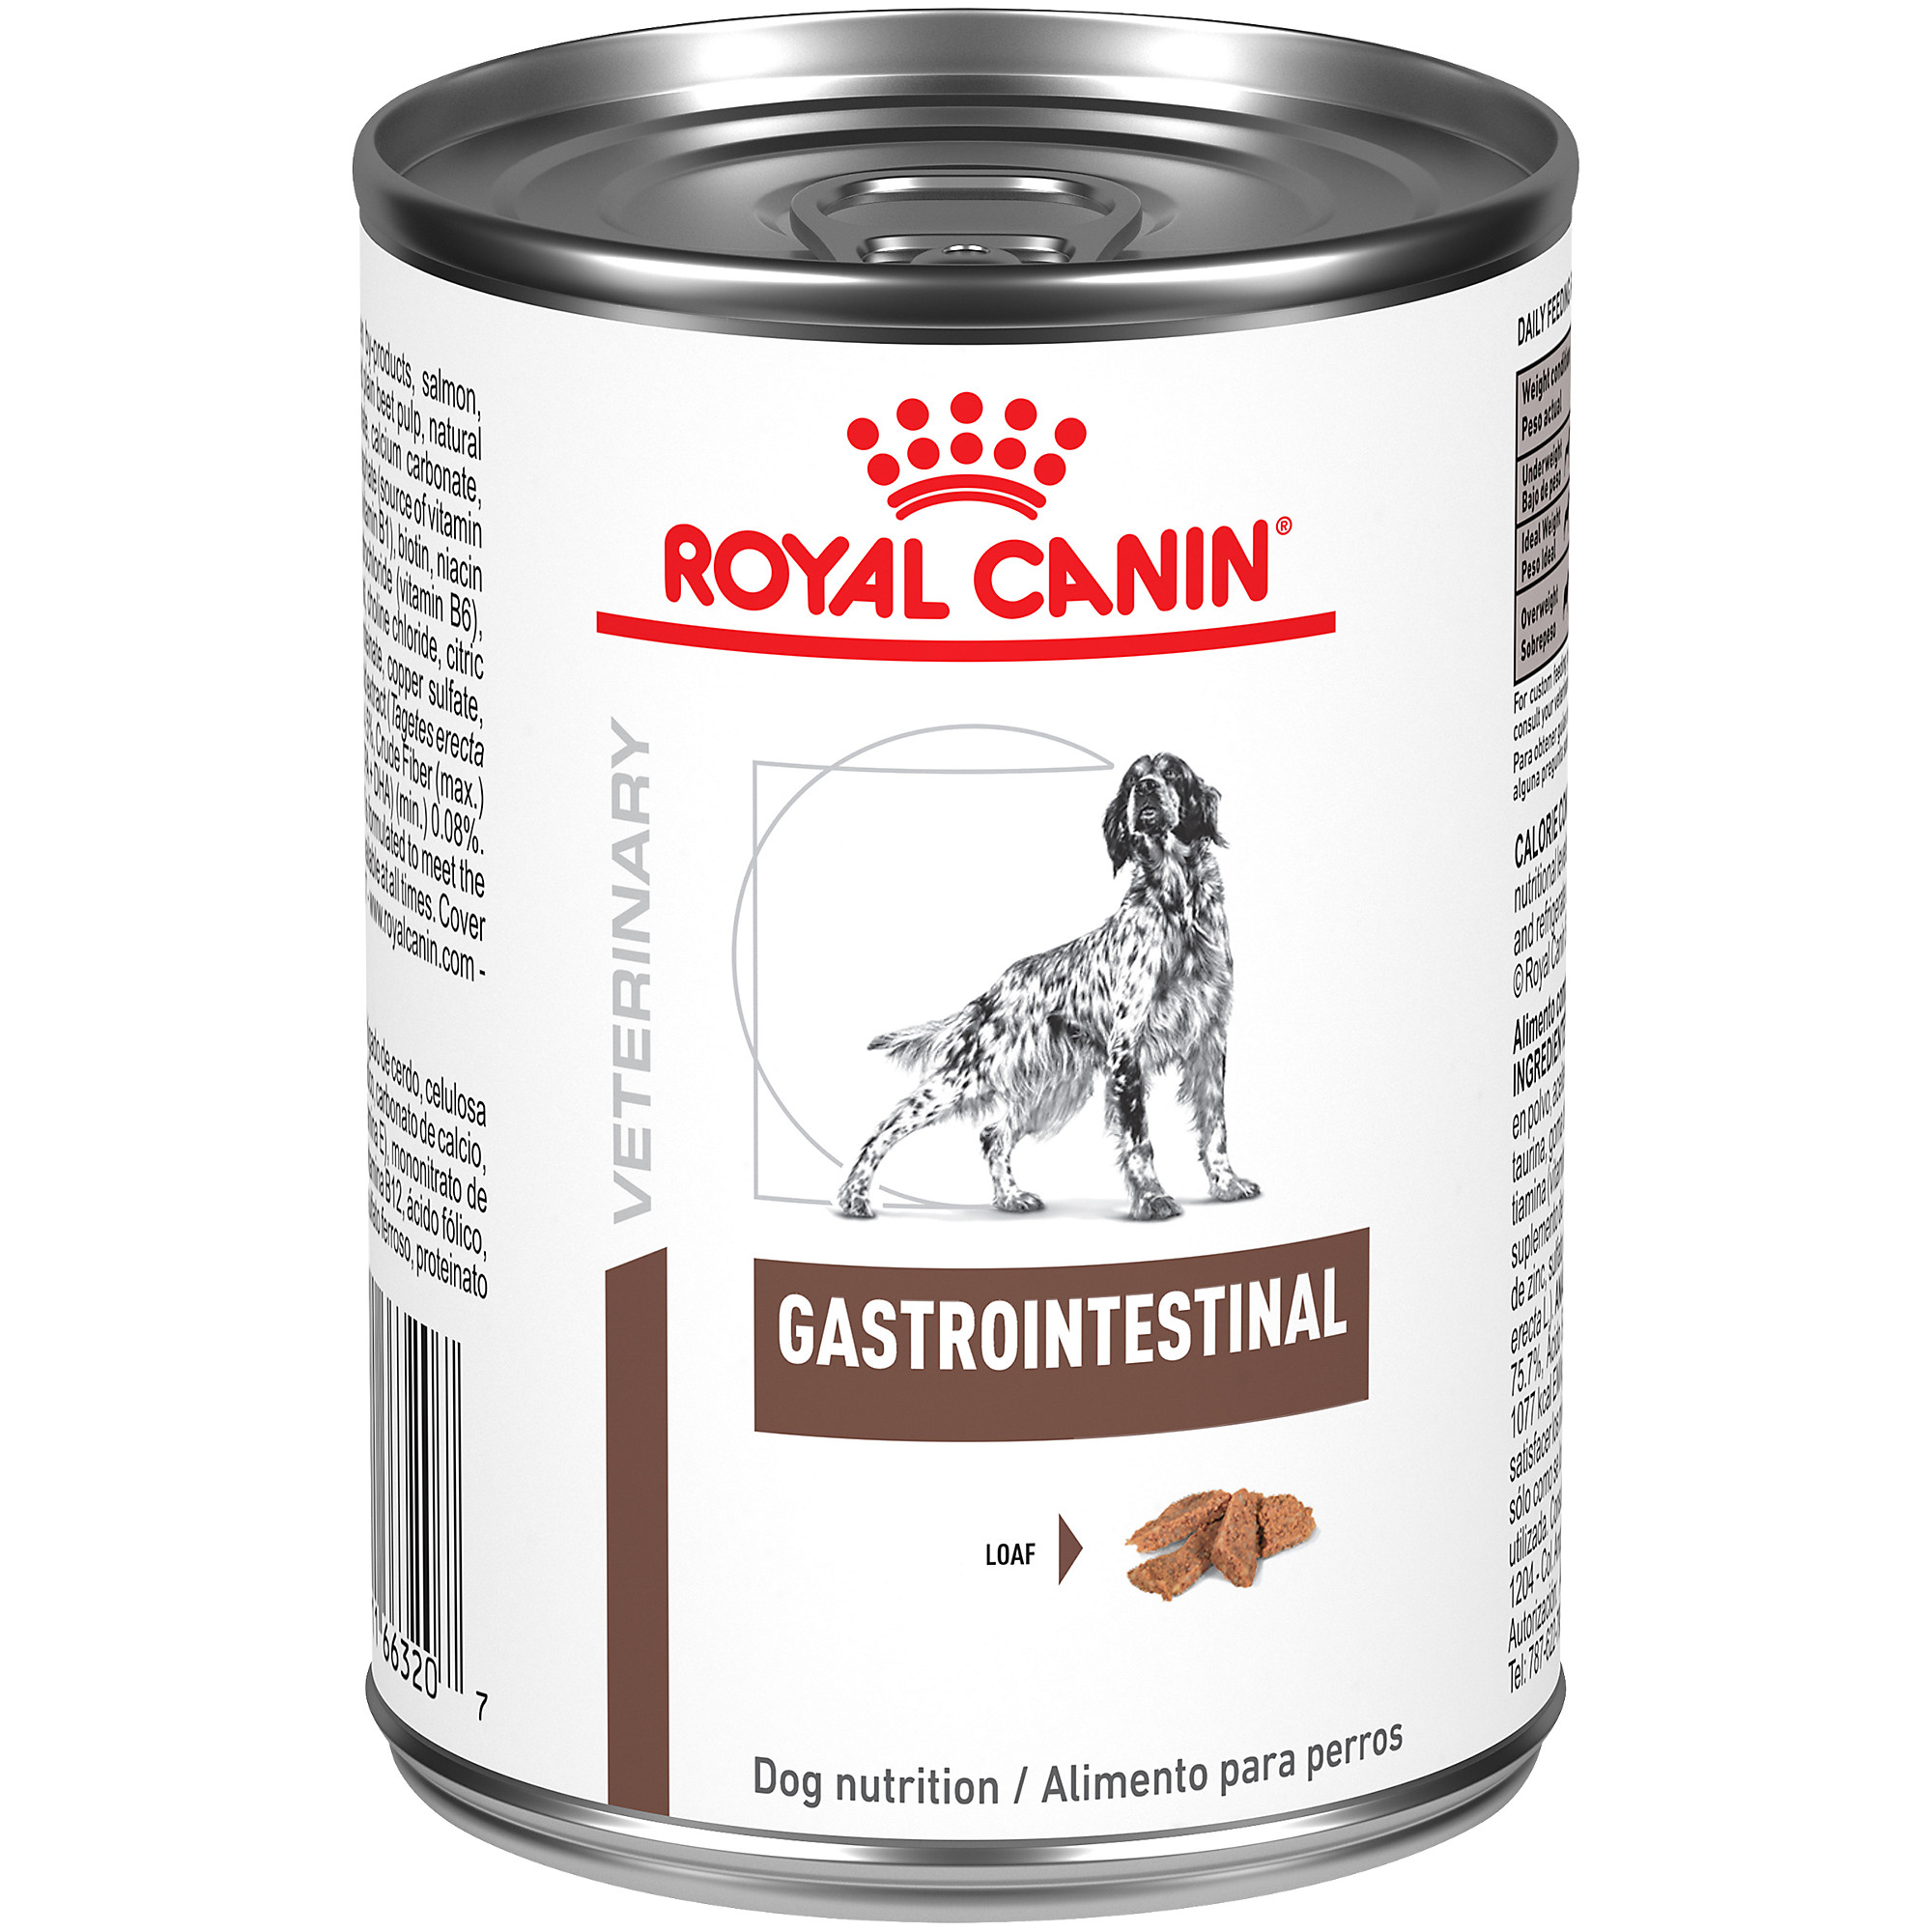 Canine Gastrointestinal Loaf Canned Dog Food Formerly